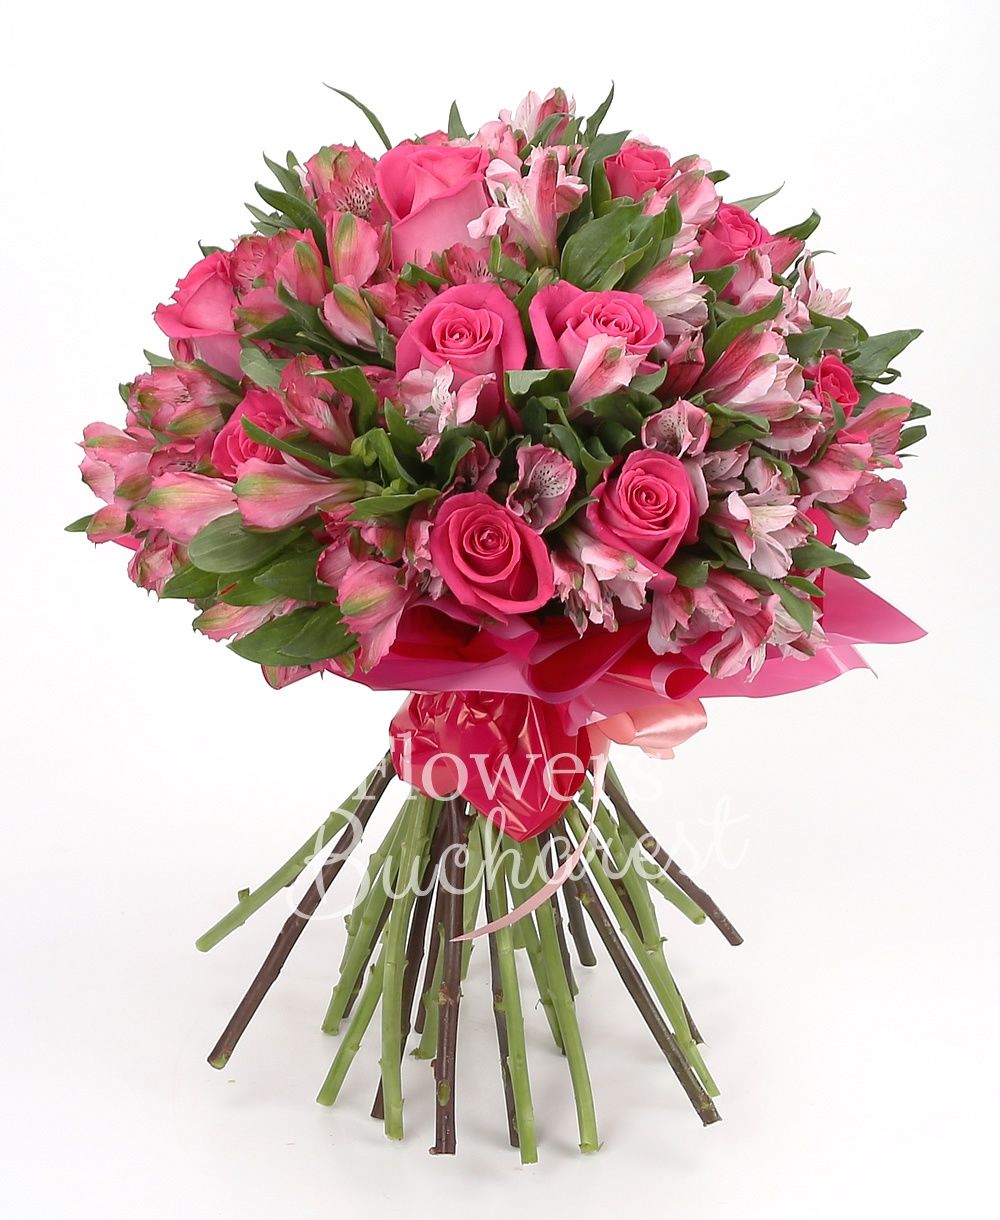 11 cyclam roses, 15 pink alstroemeria